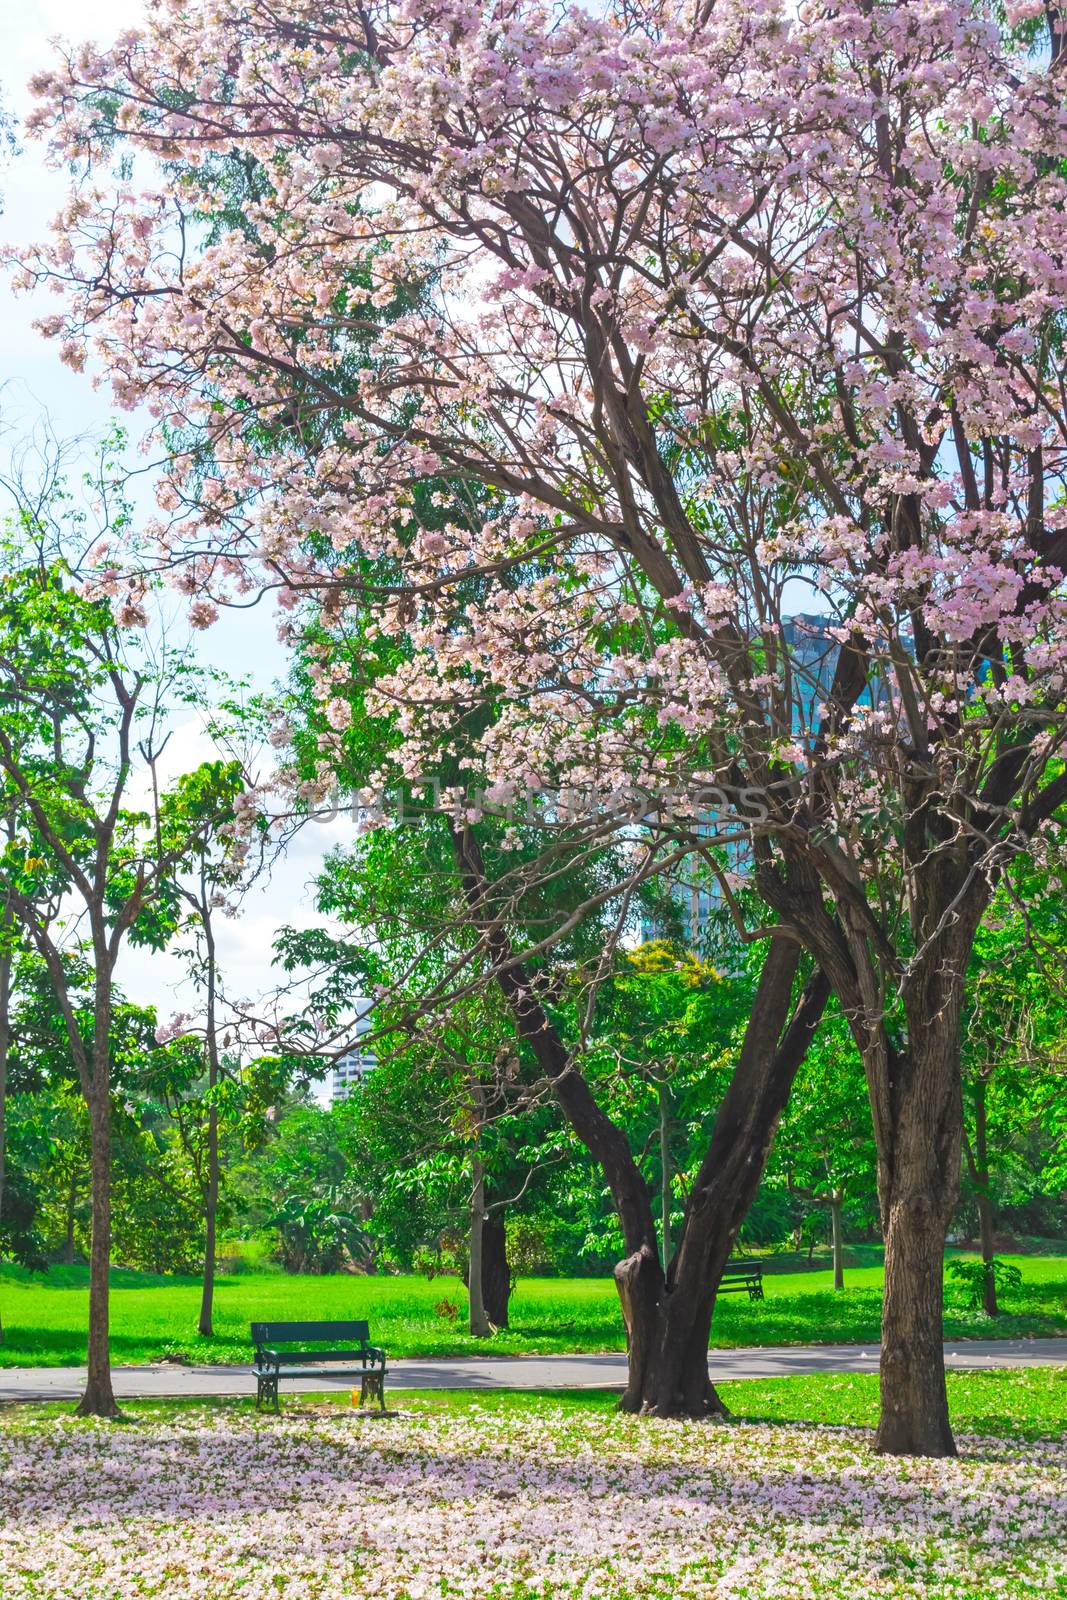 Flowers of pink trumpet trees are blossoming in Public park of Bangkok, Thailand